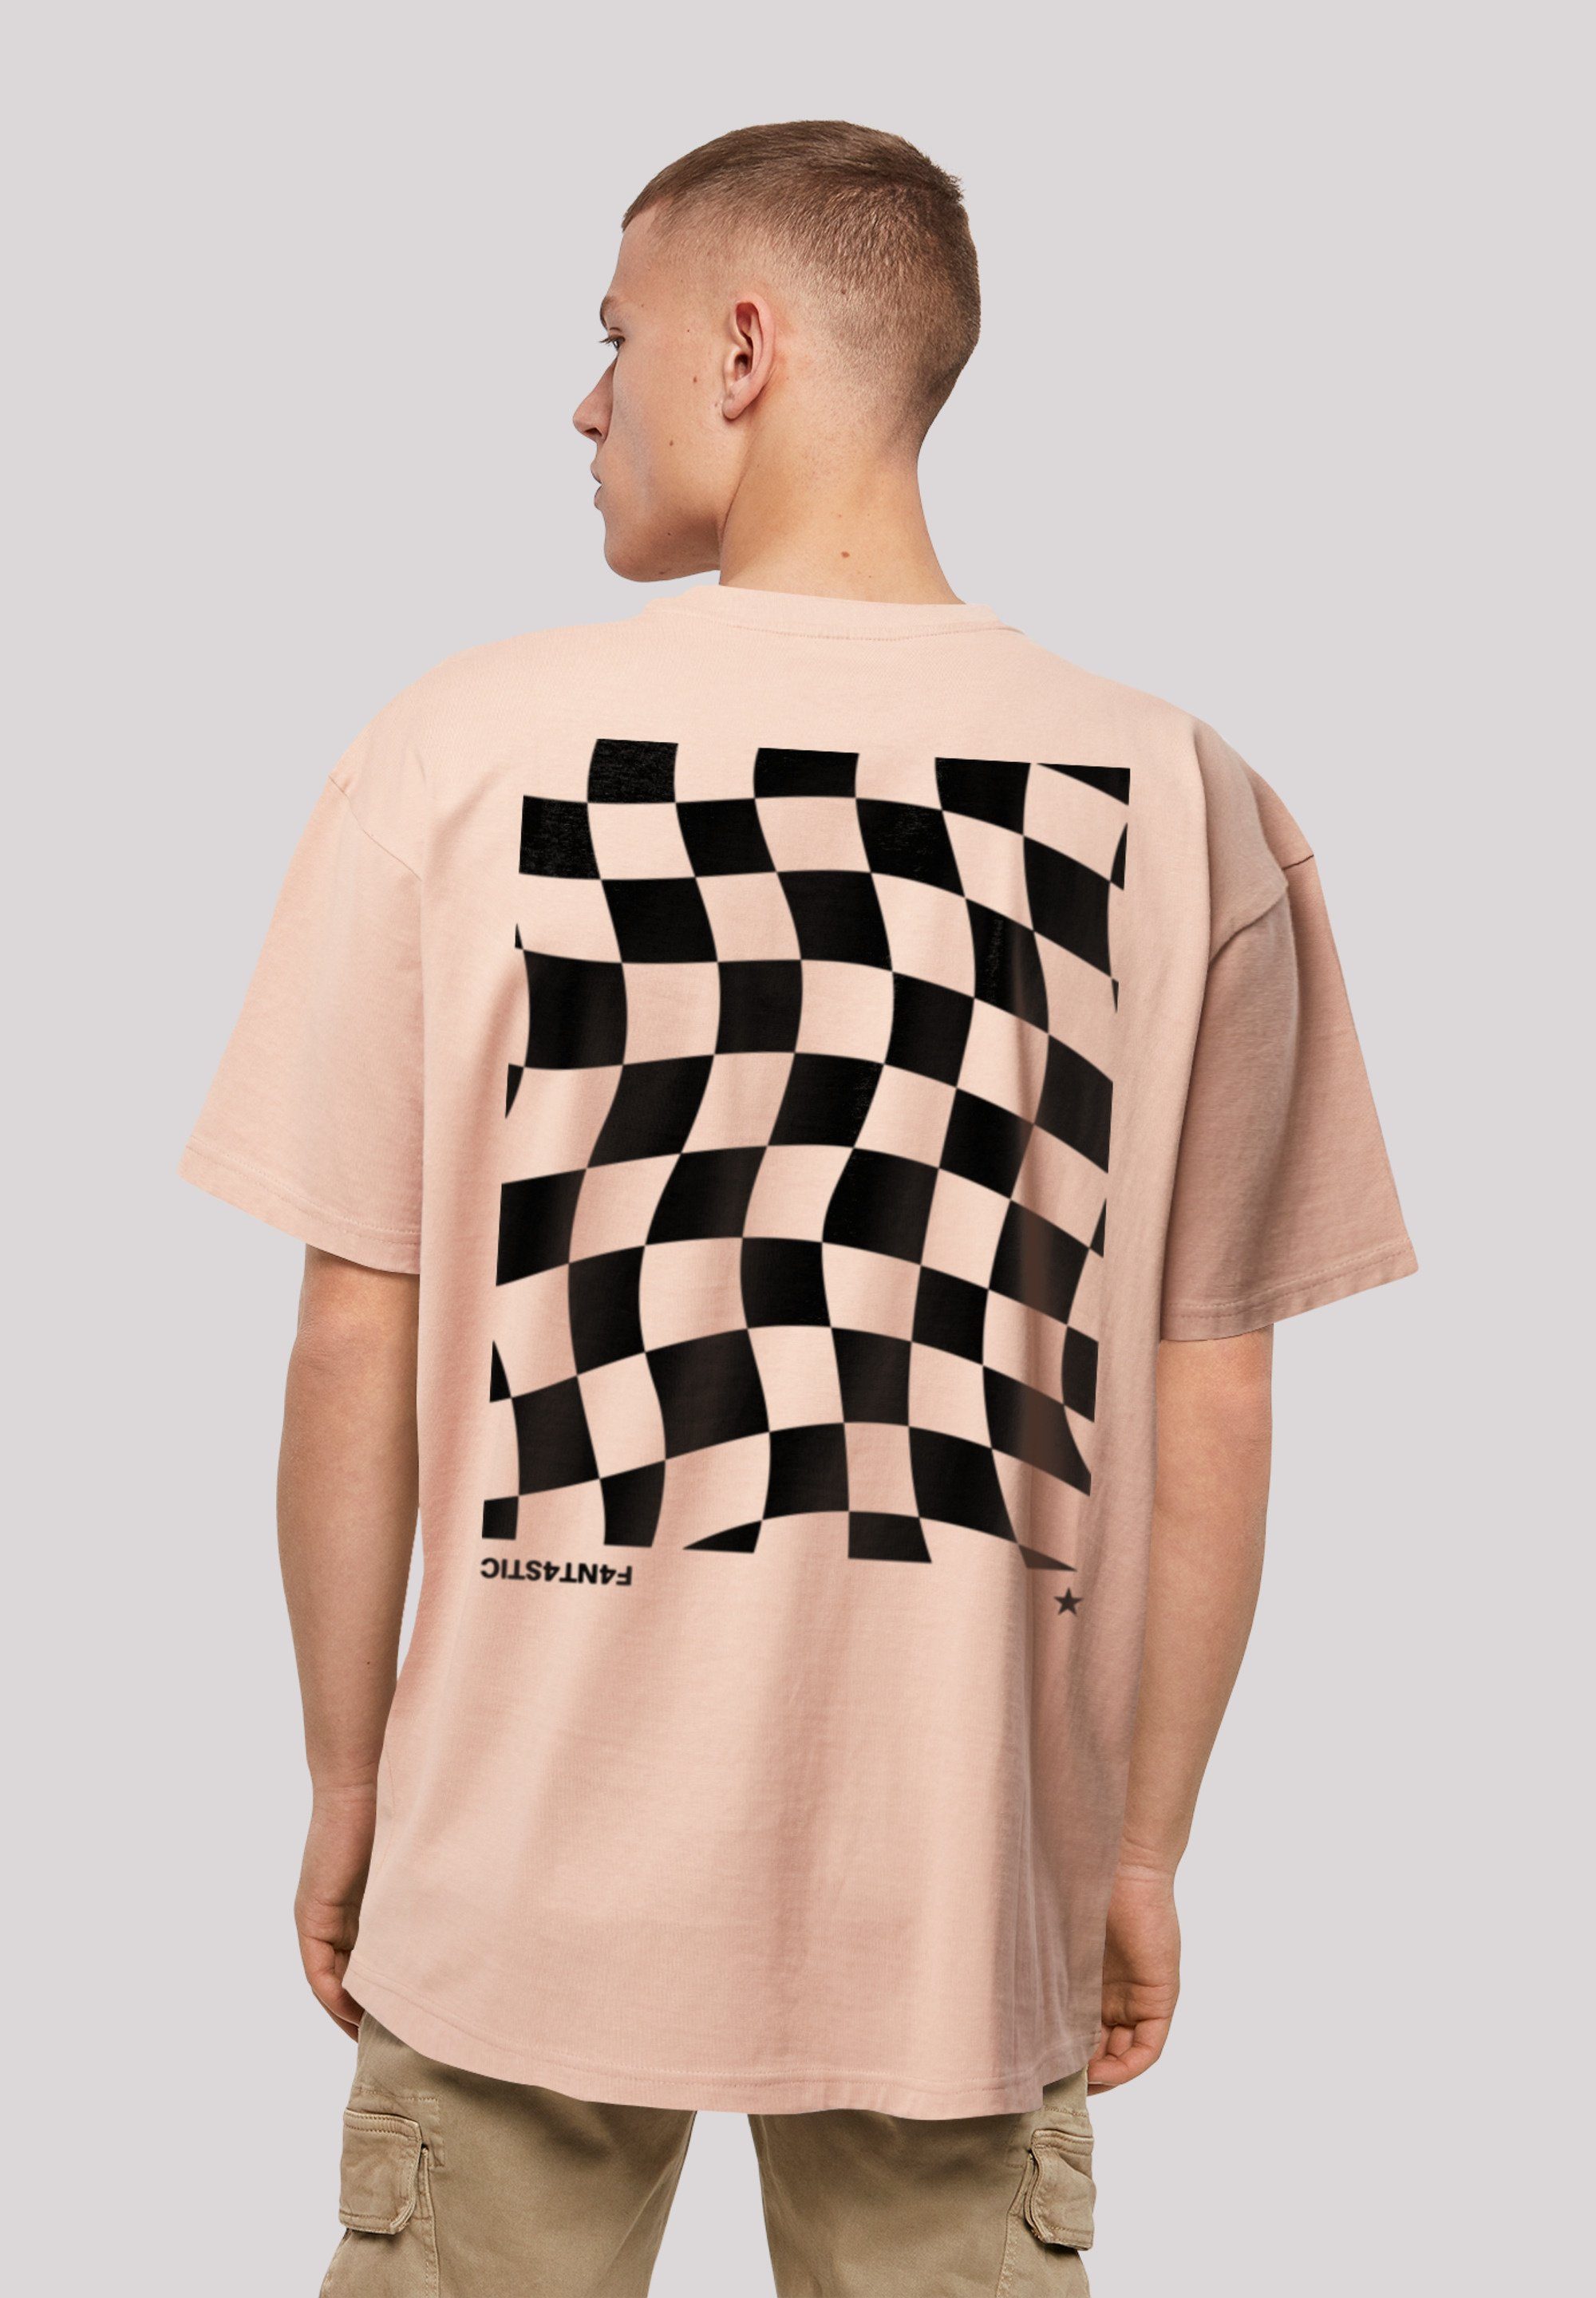 F4NT4STIC T-Shirt Wavy Schach Print amber Muster